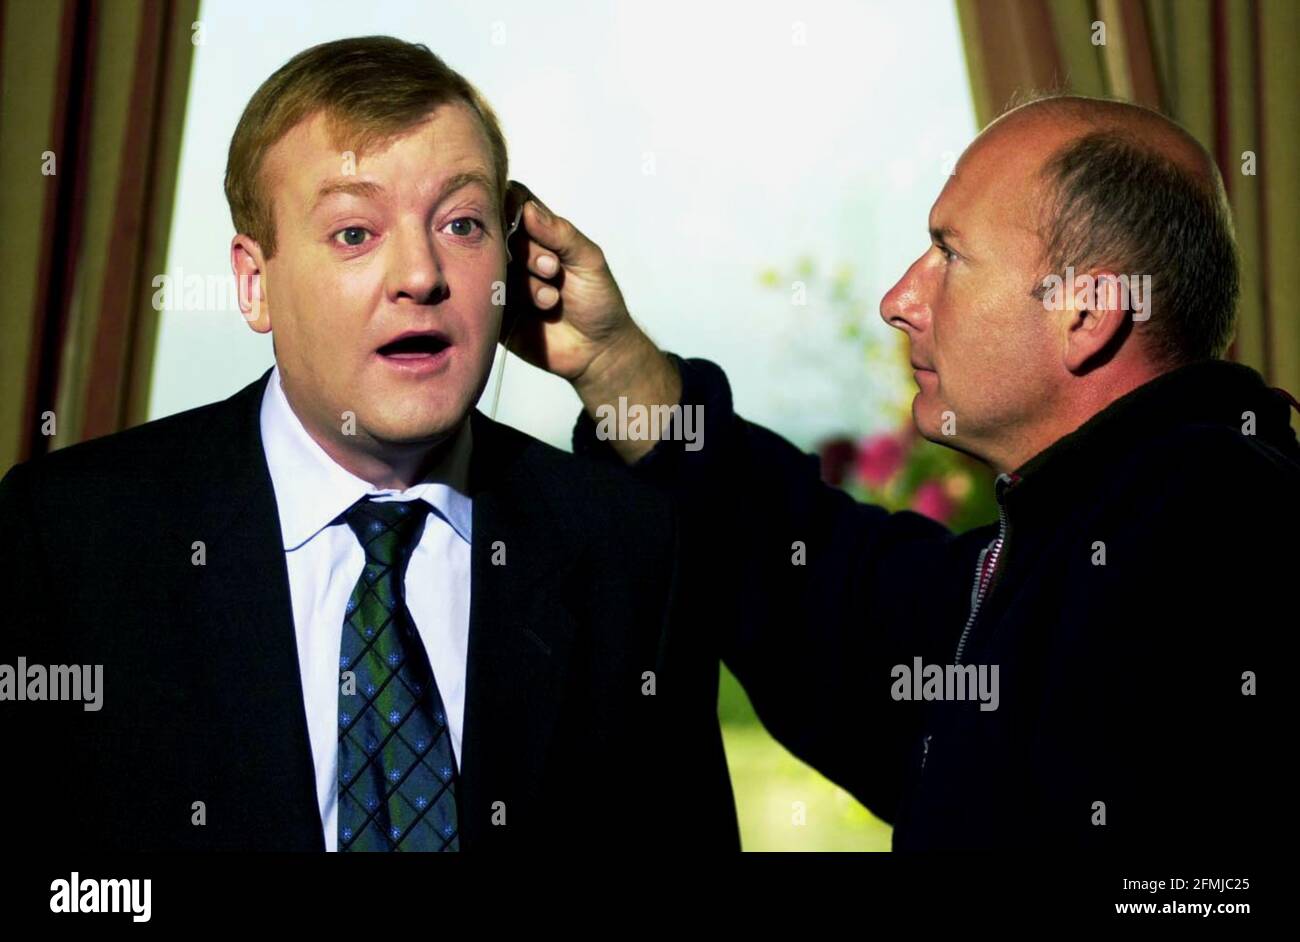 LIB DEM CONFERENCE - BOURNEMOUTH IN HIS HOTEL, LEADER CHARLES KENNEDY HAS AN EARPIECE REMOVED BY A TELEVISION TECHNICIAN BEFORE BEING INTERVIEWED BY DAVID FROST. PIC: JOHN VOOS      23.9.01 Stock Photo